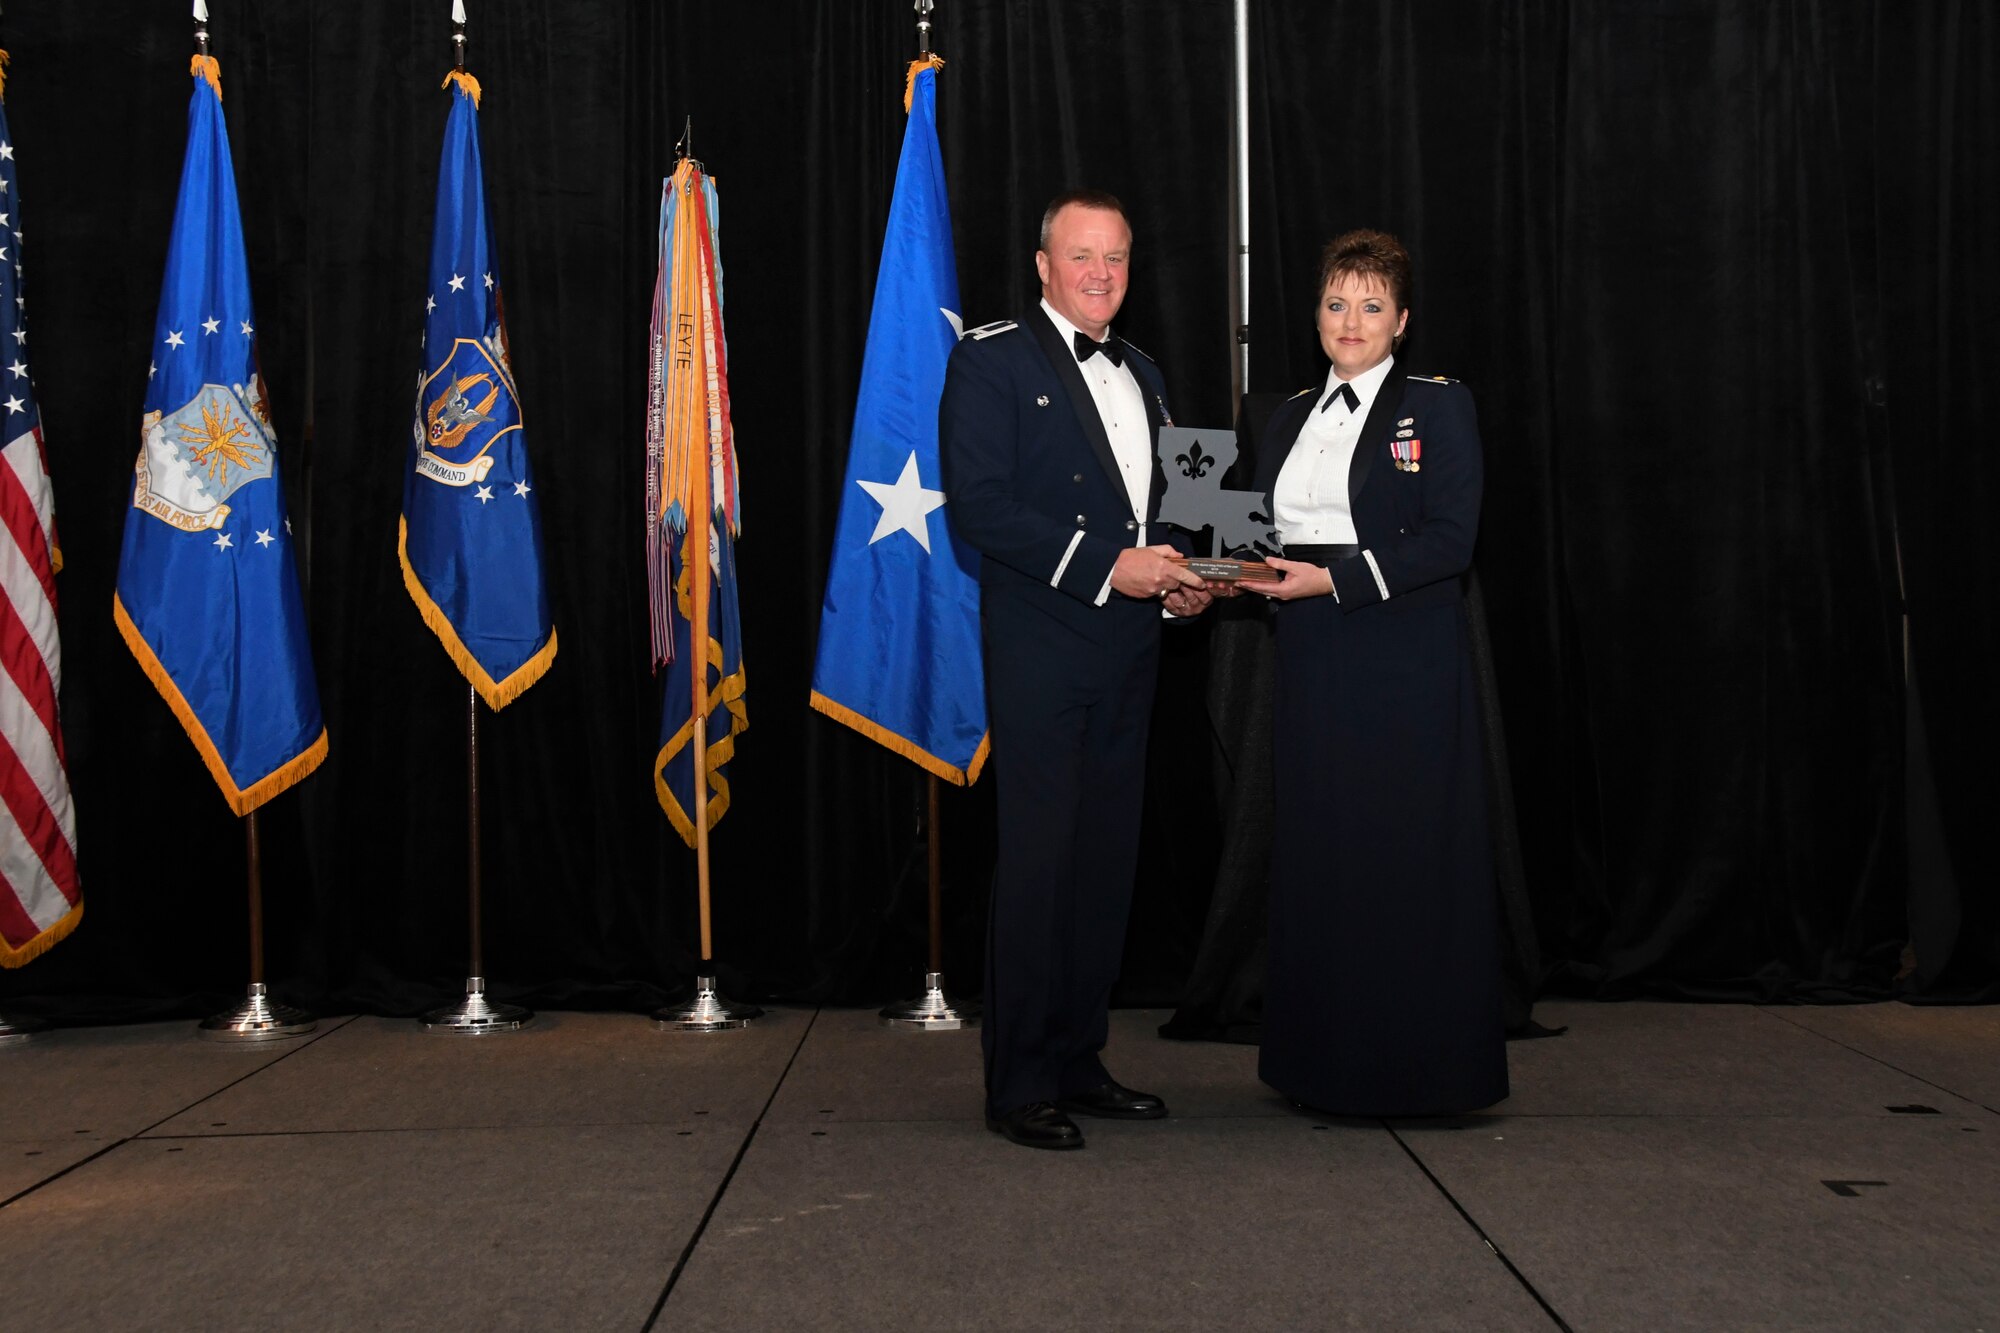 Col. Bruce R. Cox, the 307th Bomb Wing commander, presents Maj. Misty Bartley, 489th Bomb Group, the 307th Bomb Wing’s Field Grade Officer of the Year award for 2016. The award was presented during the 307th Bomb Wing’s 75th Anniversary and Awards Gala at the Shreveport Convention Center April 1, 2017. (U.S. Air Force photo by Staff Sgt. Callie Ware/Released)